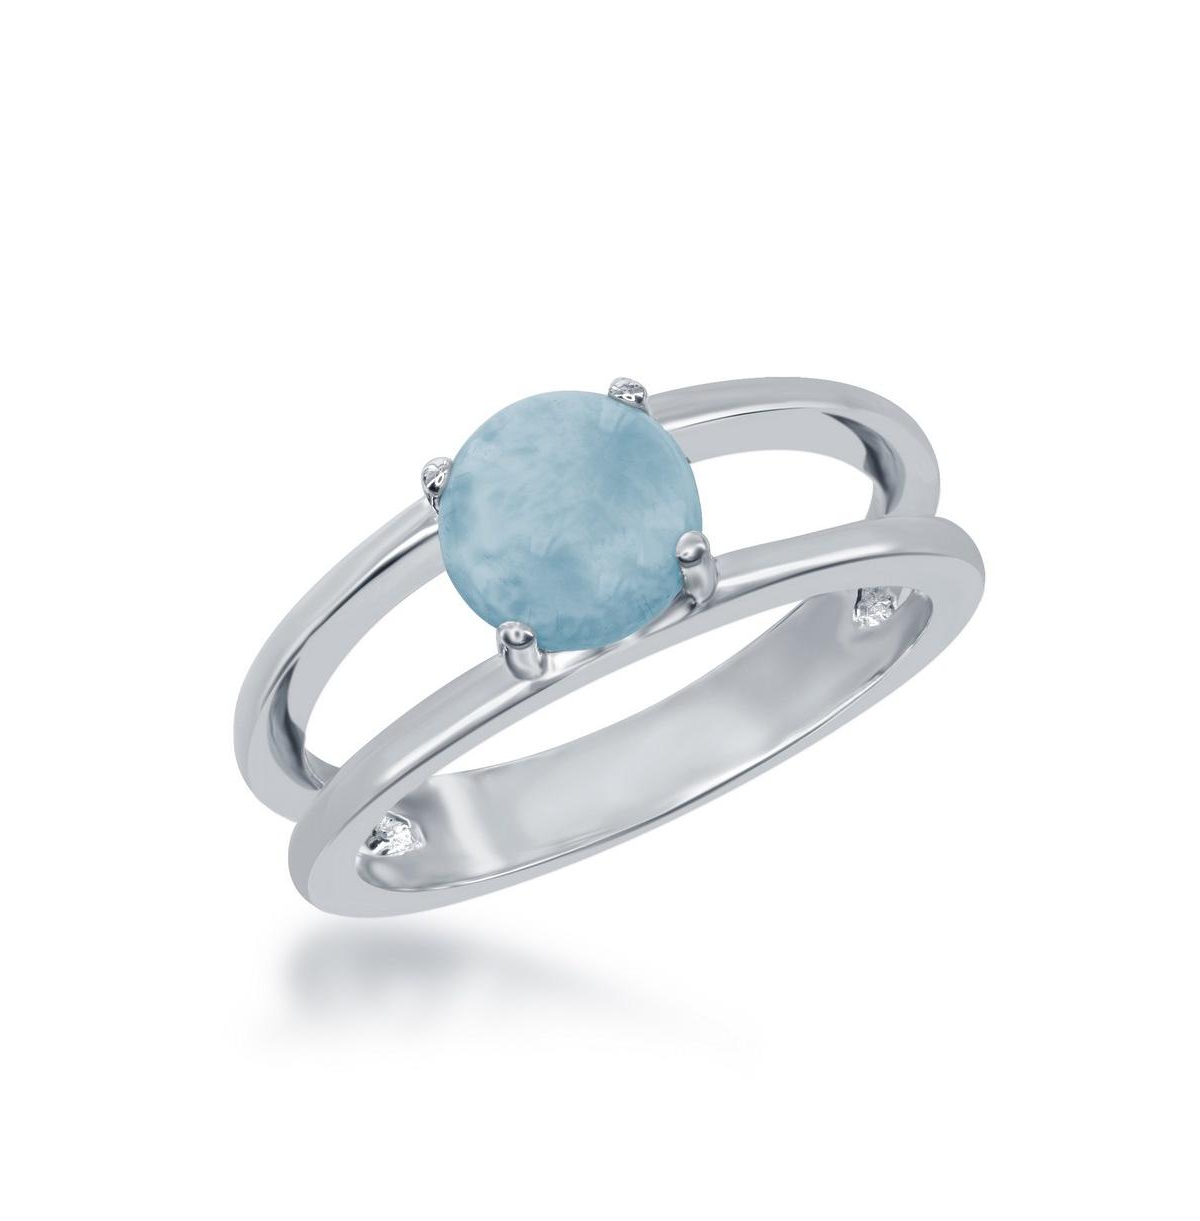 Sterling Silver Round Pronged Larimar Ring - Blue